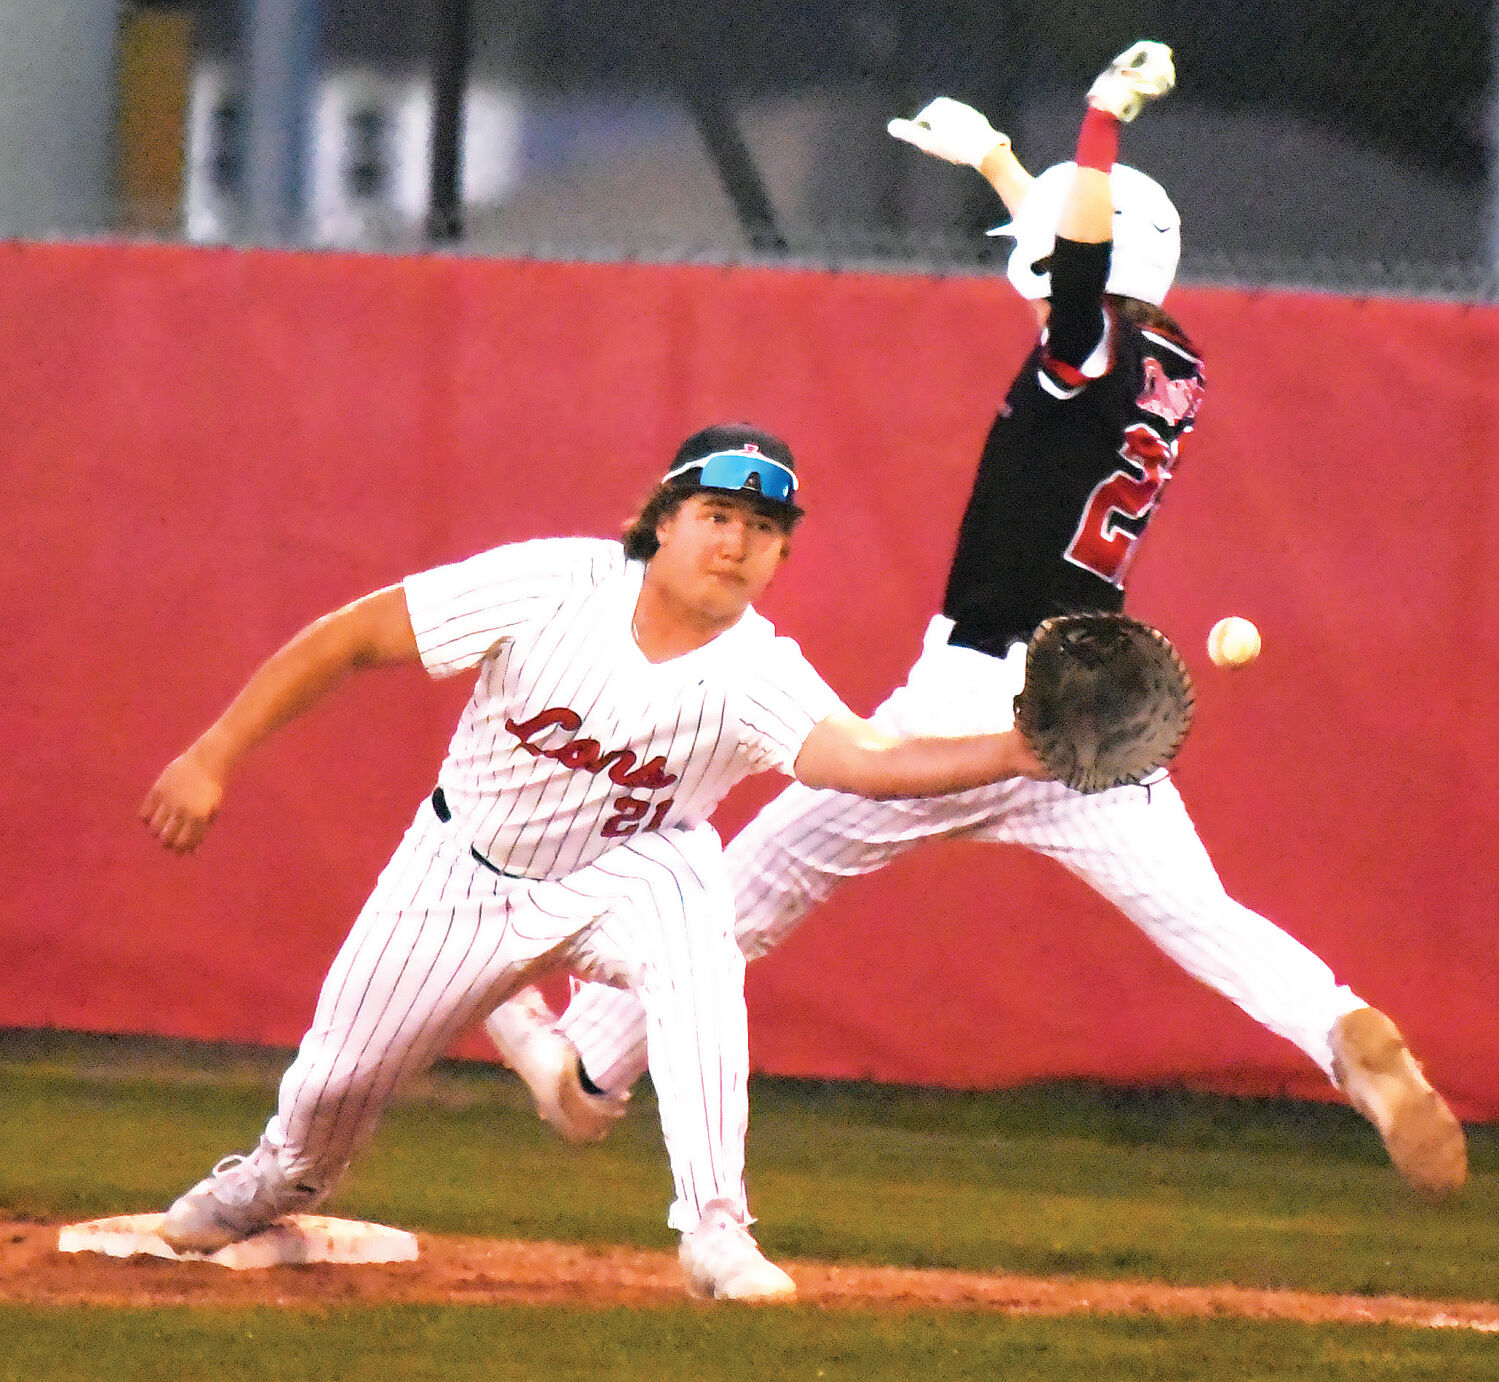 Melissa outscores Greenville Lions, 8-2 in district baseball